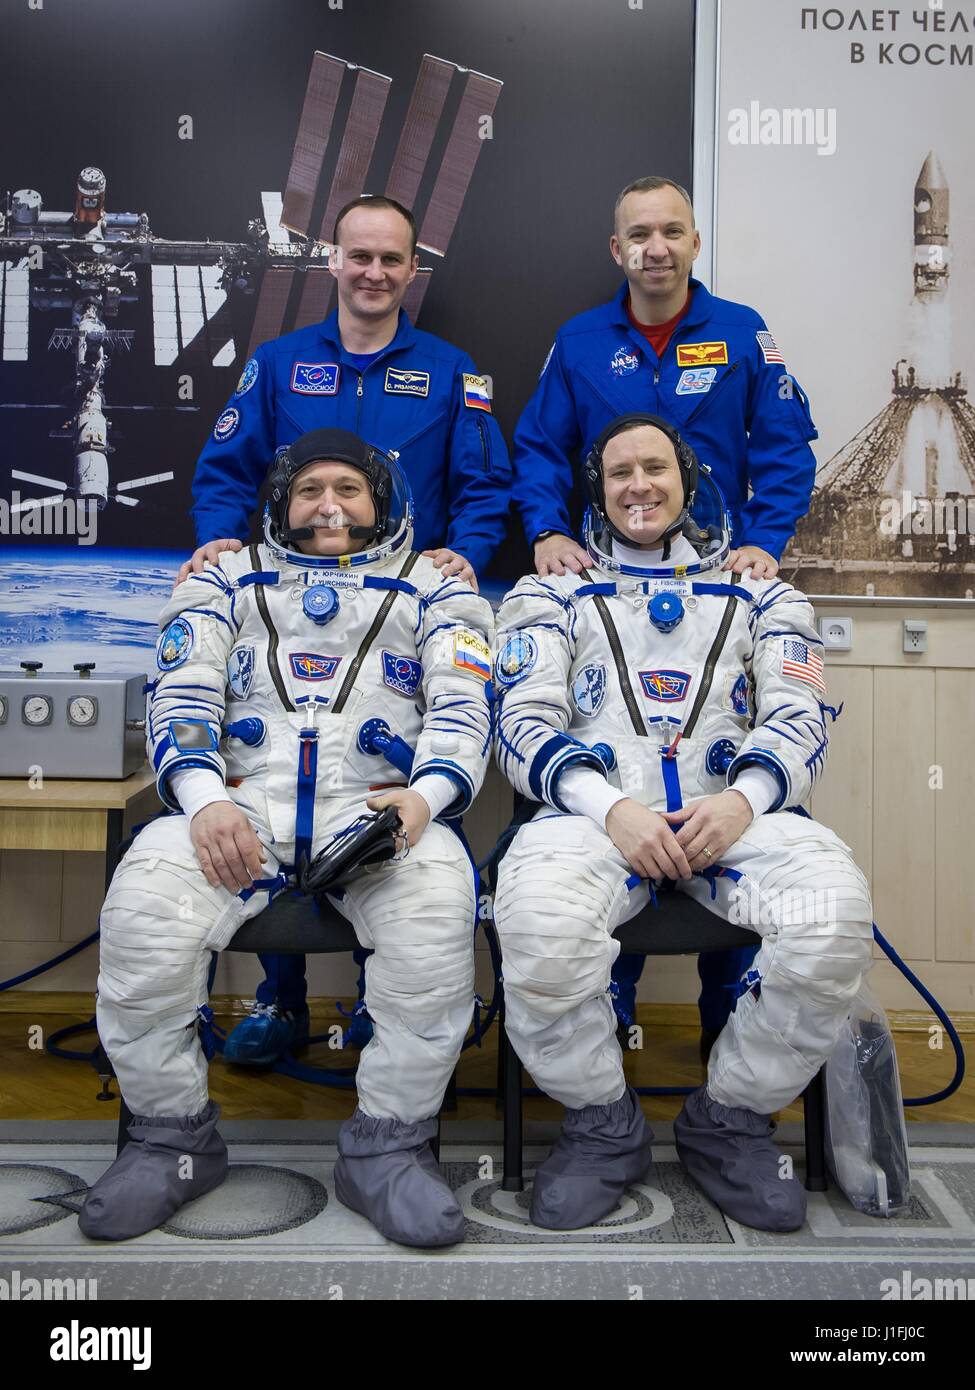 NASA International Space Station Expedition 51 prime crew members (front, L-R) Russian cosmonaut Fyodor Yurchikhin of Roscosmos, and American astronaut Jack Fischer pose with their backup crew members (back, L-R), Russian cosmonaut Sergey Ryazanskiy of Roscosmos, and American astronaut Randy Bresnik during pre-launch preparations at the Baikonur Cosmodrome Integration Building April 6, 2017 in Baikonur, Kazakhstan.       (photo by Andrey Shelepin /NASA   via Planetpix) Stock Photo